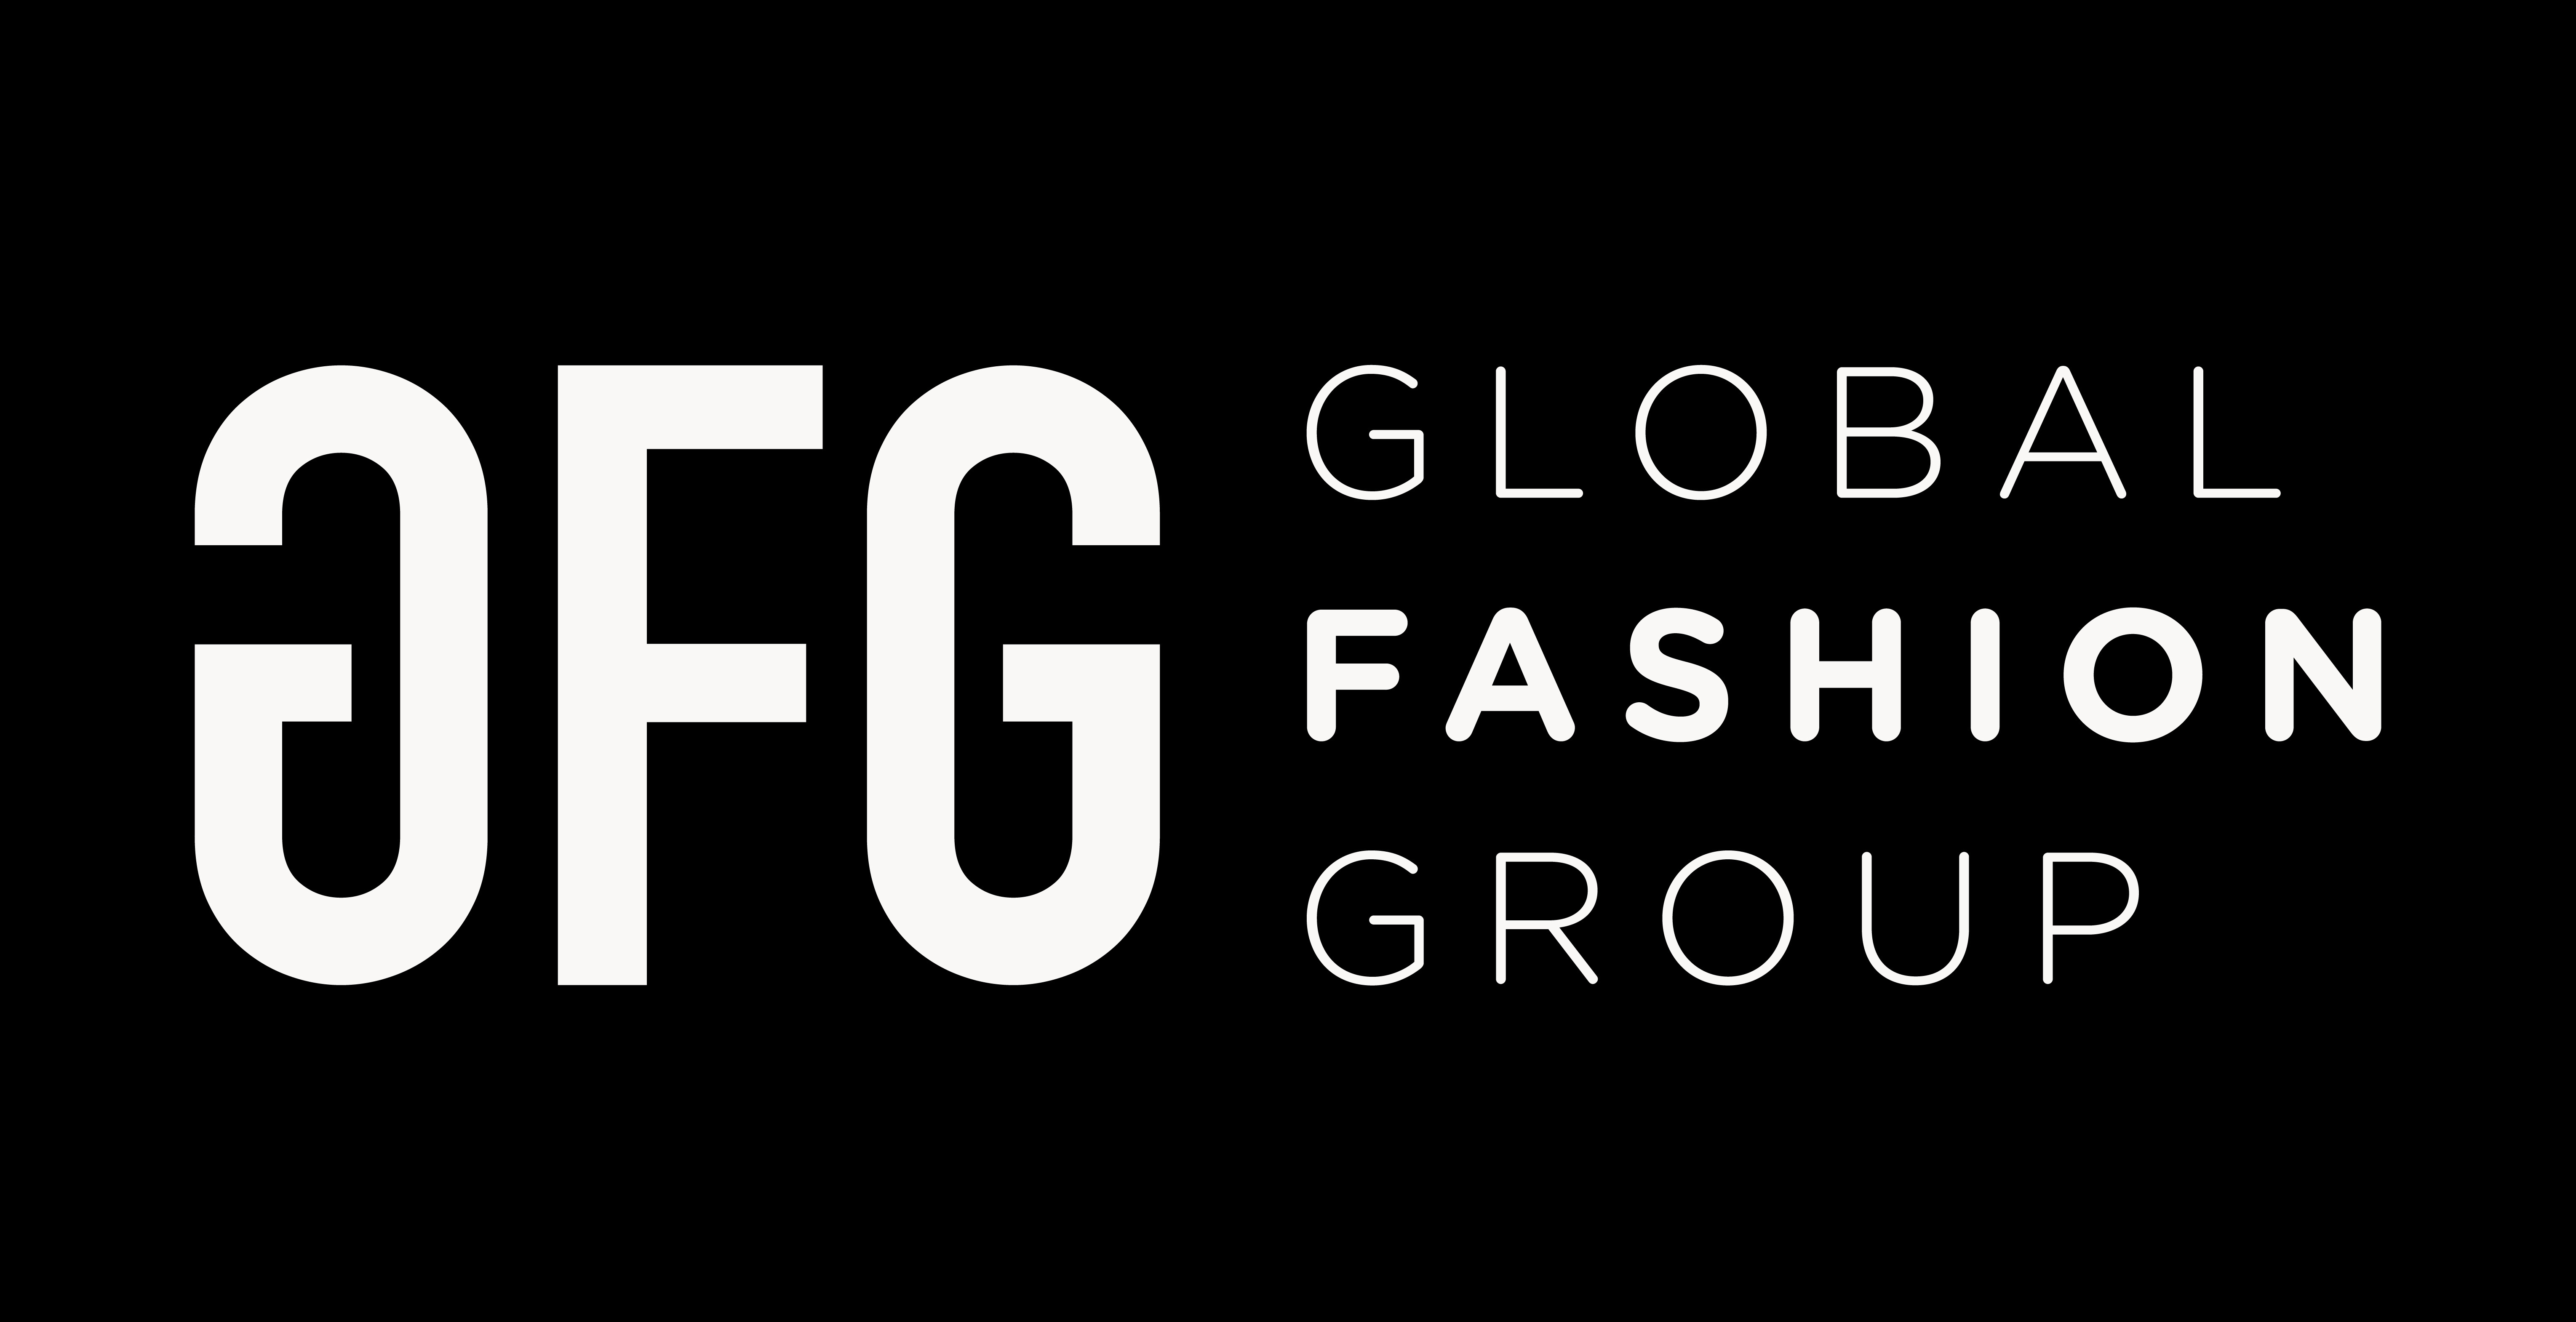 GFG Global Fashion Group Logo PNG vector in SVG, PDF, AI, CDR format